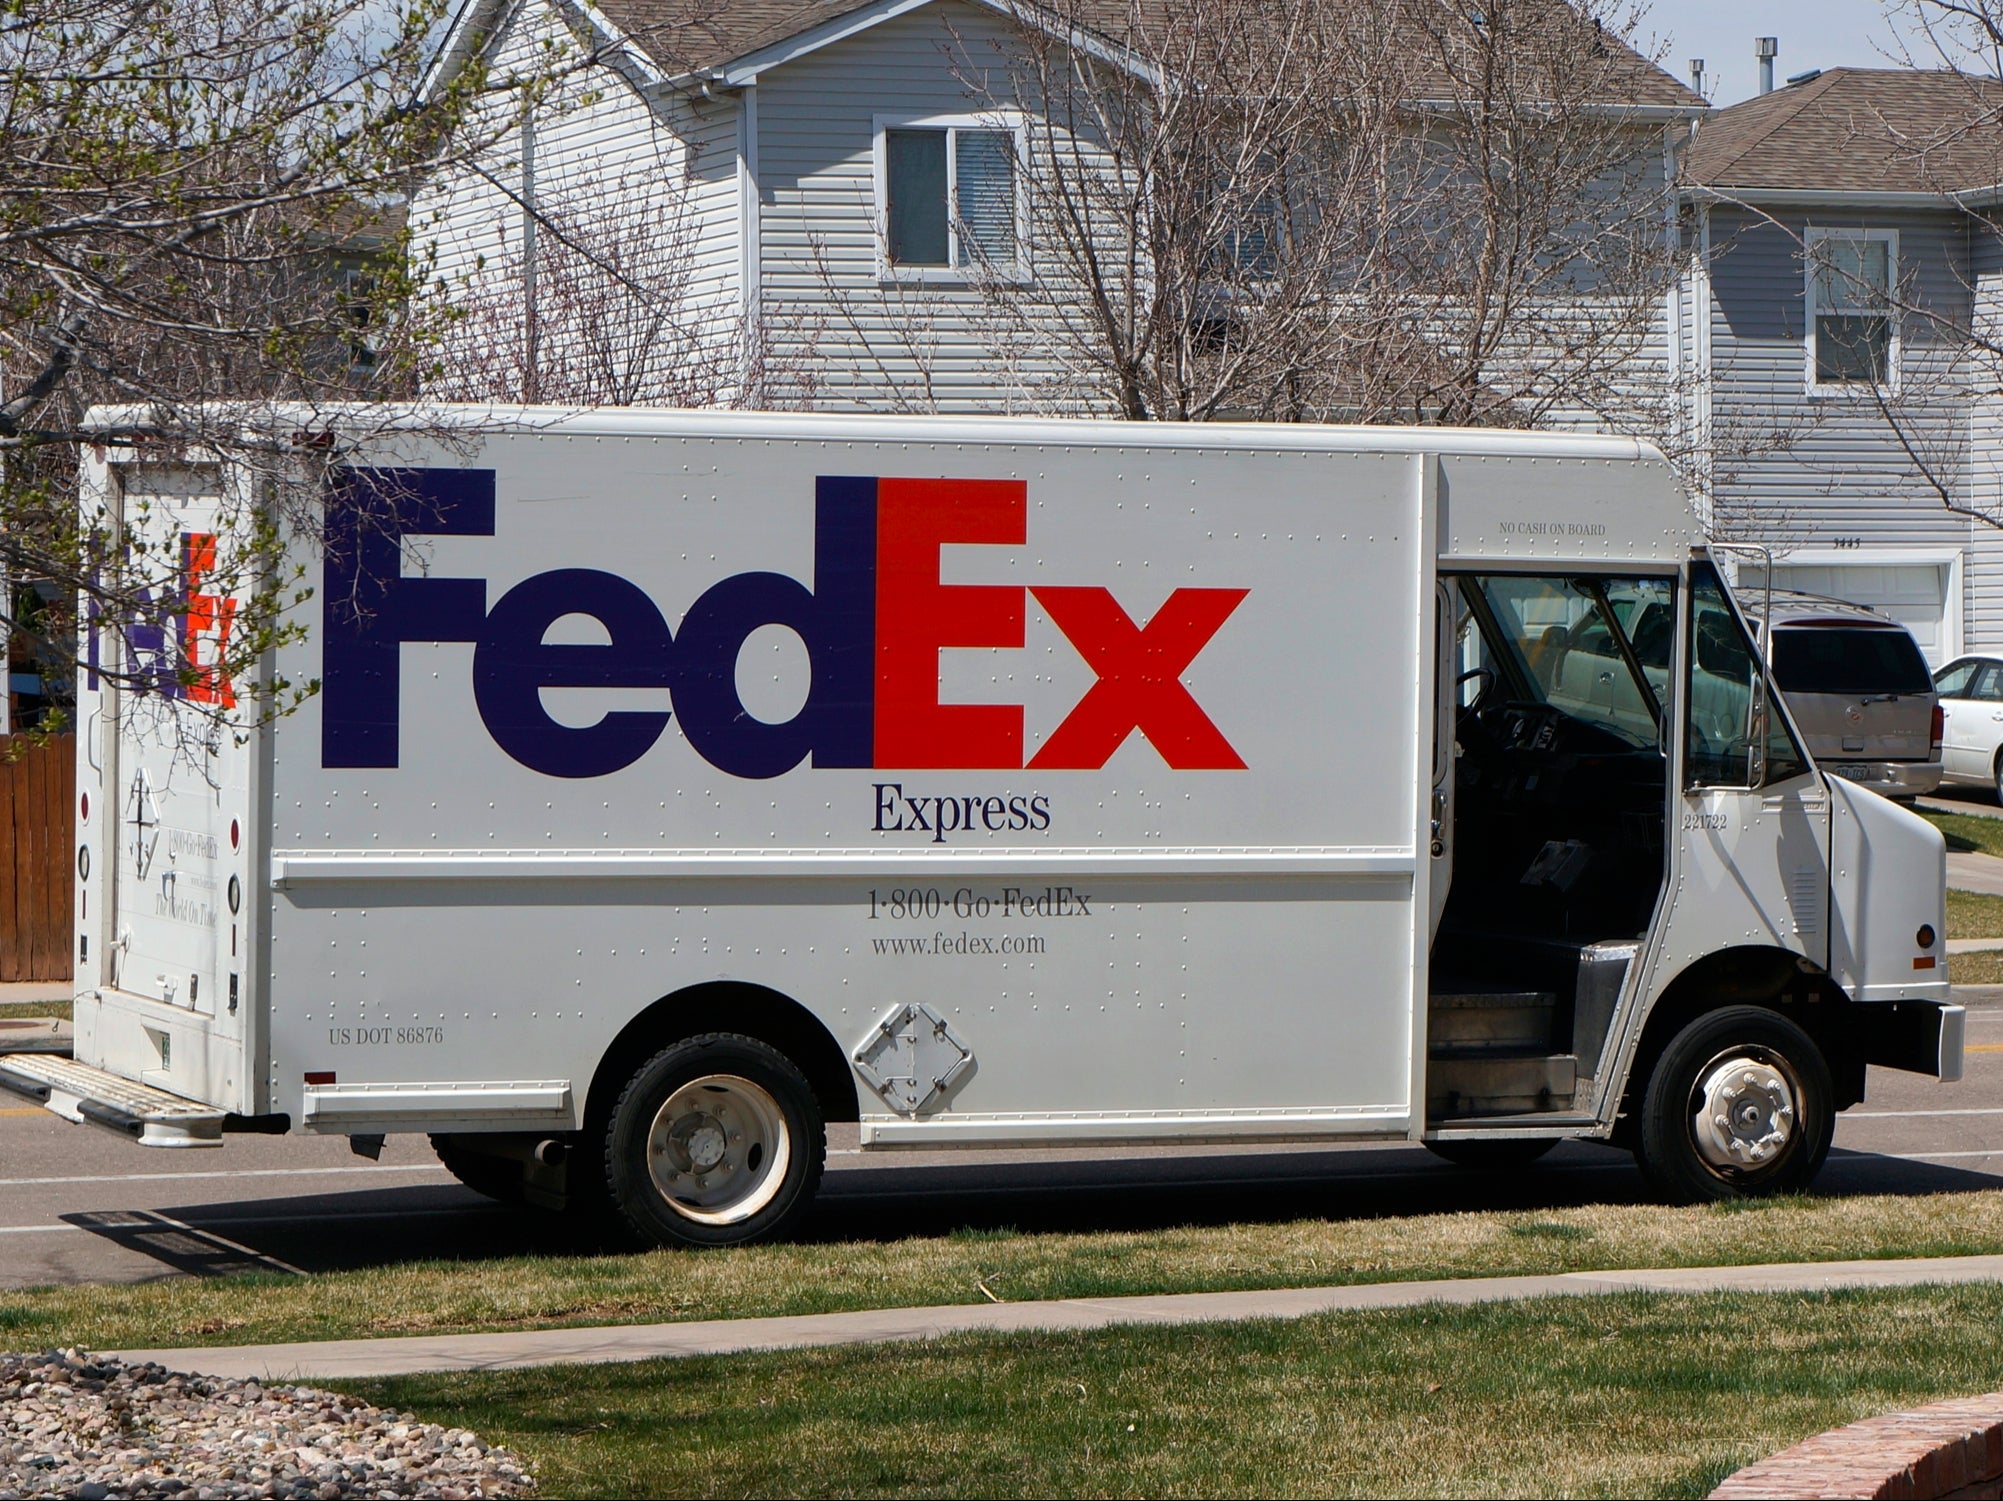 A spokesperson for FedEx reiterated that ‘shipments of this nature are prohibited within the FedEx network’